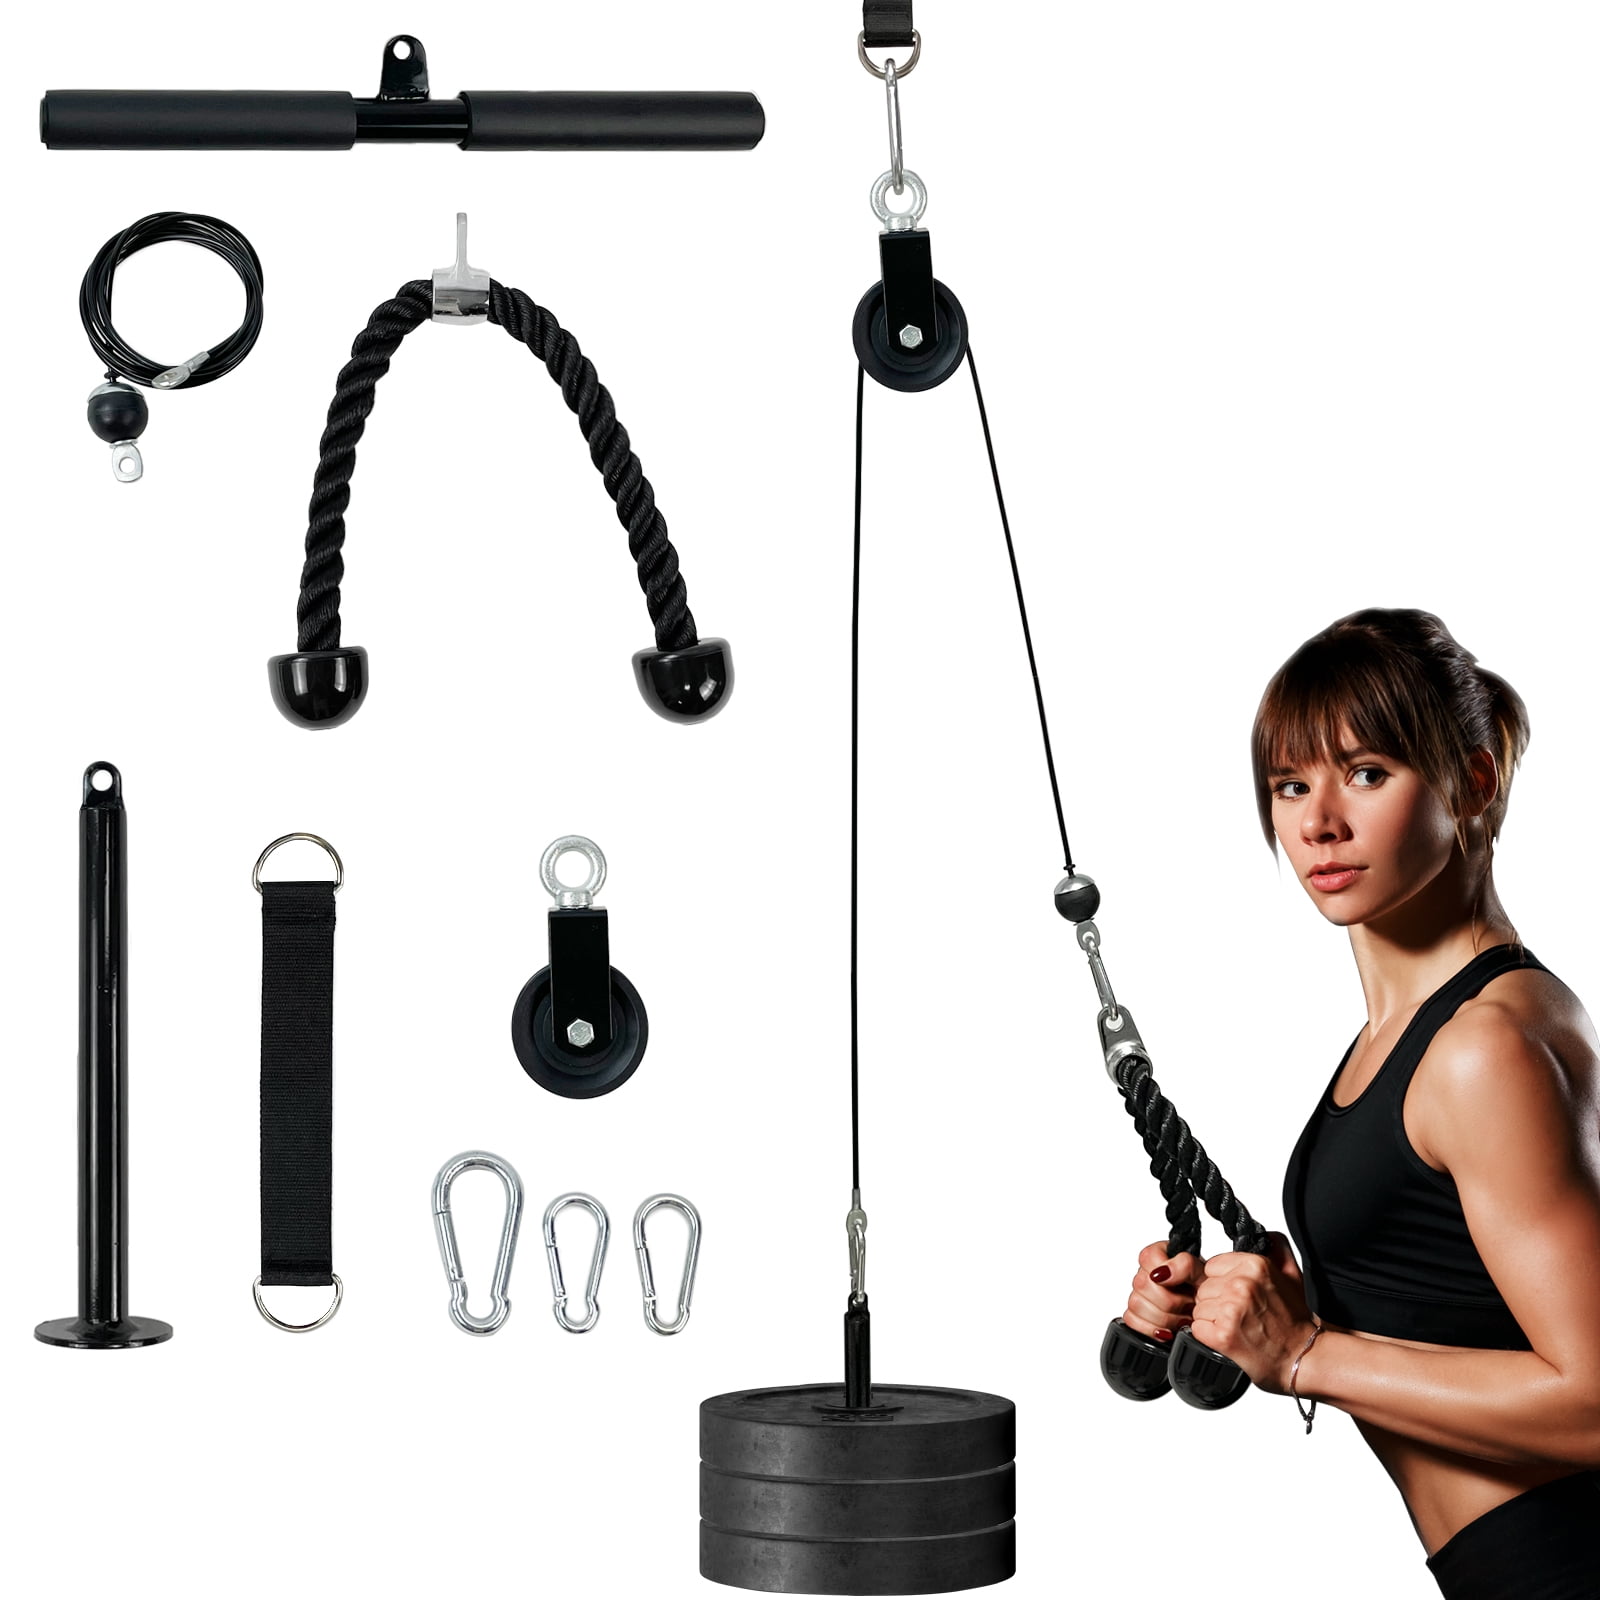 Weight Cable Pulley System Gym Upgraded LAT Pull Down Machine Accessories,  LAT And Lift Cable Pulley Attachments For Home Gym Equipment, Crossover, Accessory Chest Exercises